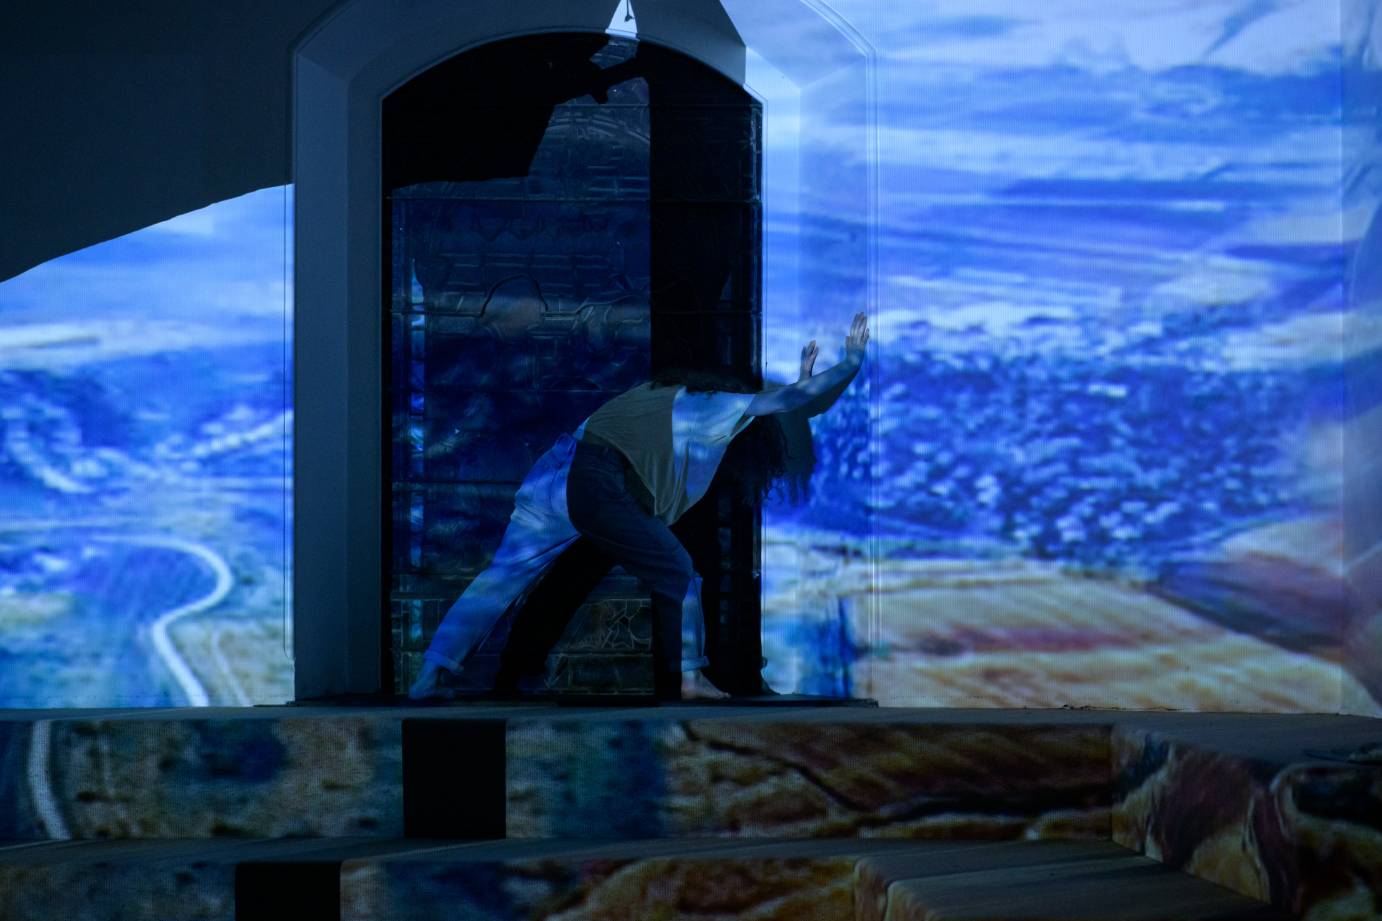 A woman lunges against a nave, drenched in a projection of a landscape